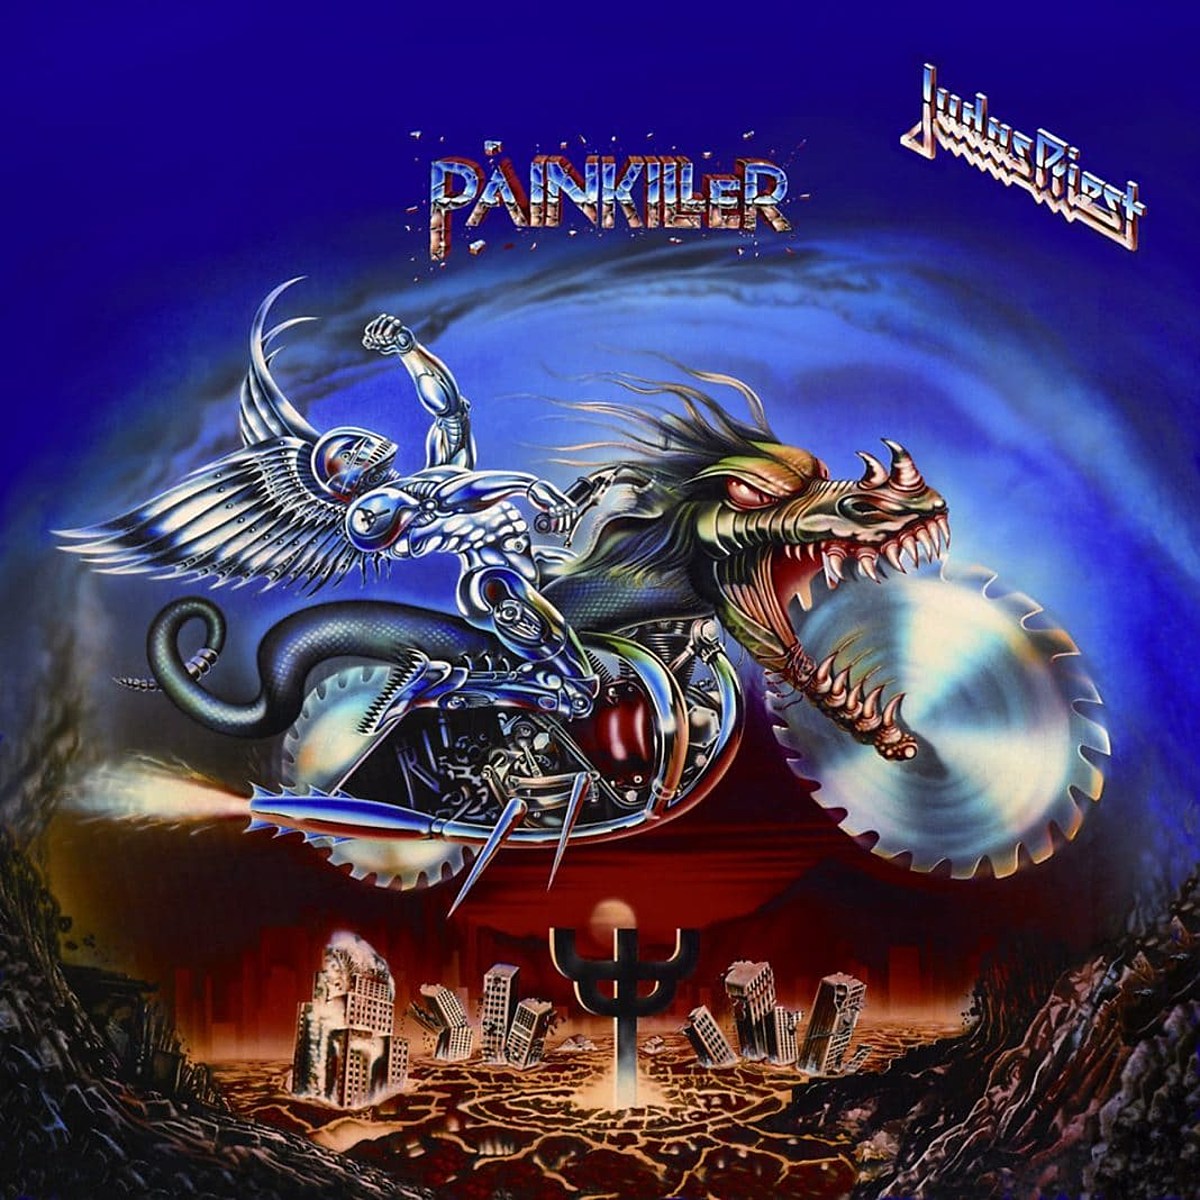 Cover art of 1990 album Painkiller featuring a fantasy motorcycle